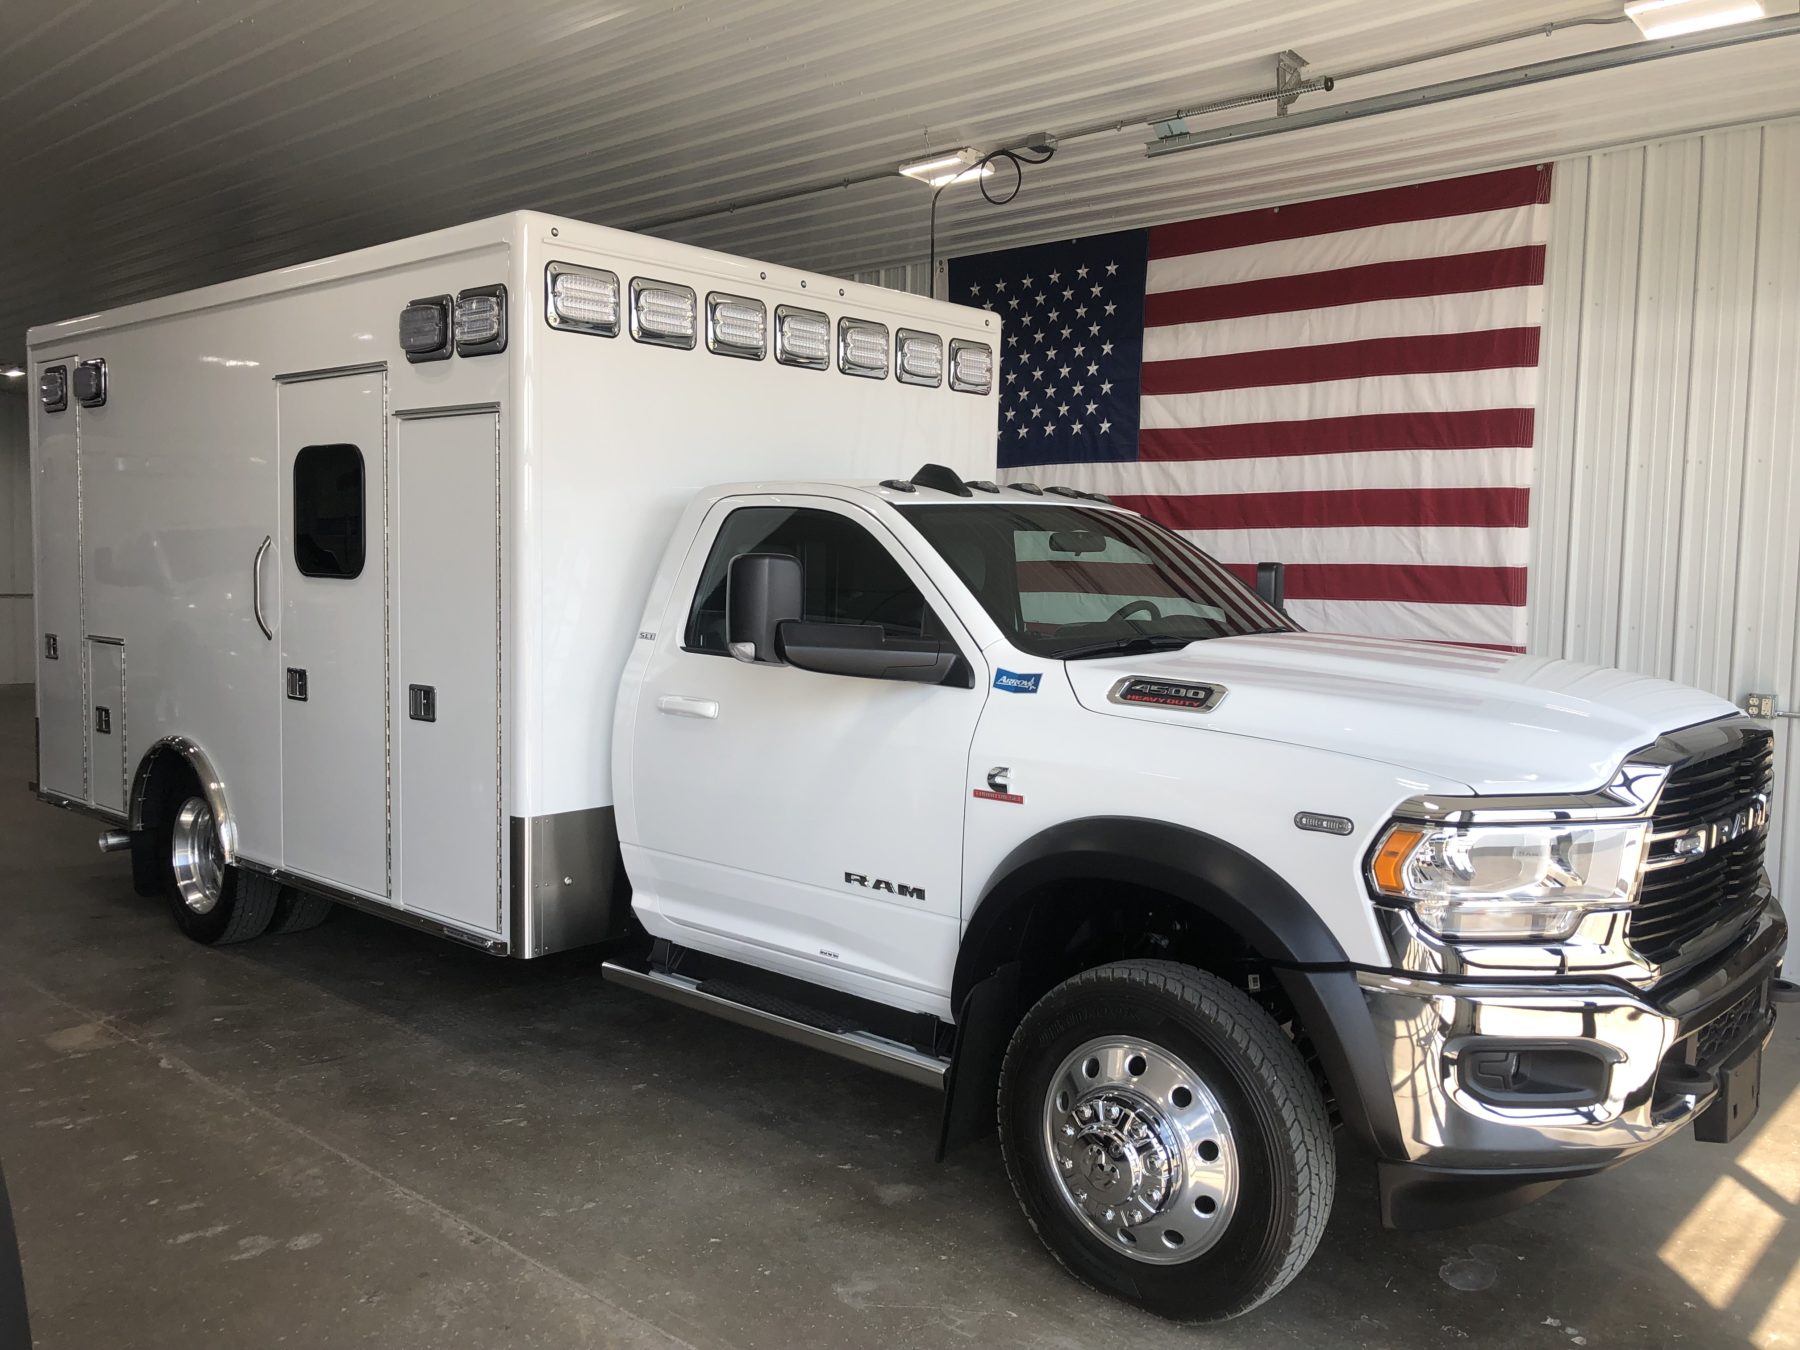 2021 Ram 4500 4x4 Heavy Duty Ambulance For Sale – Picture 1